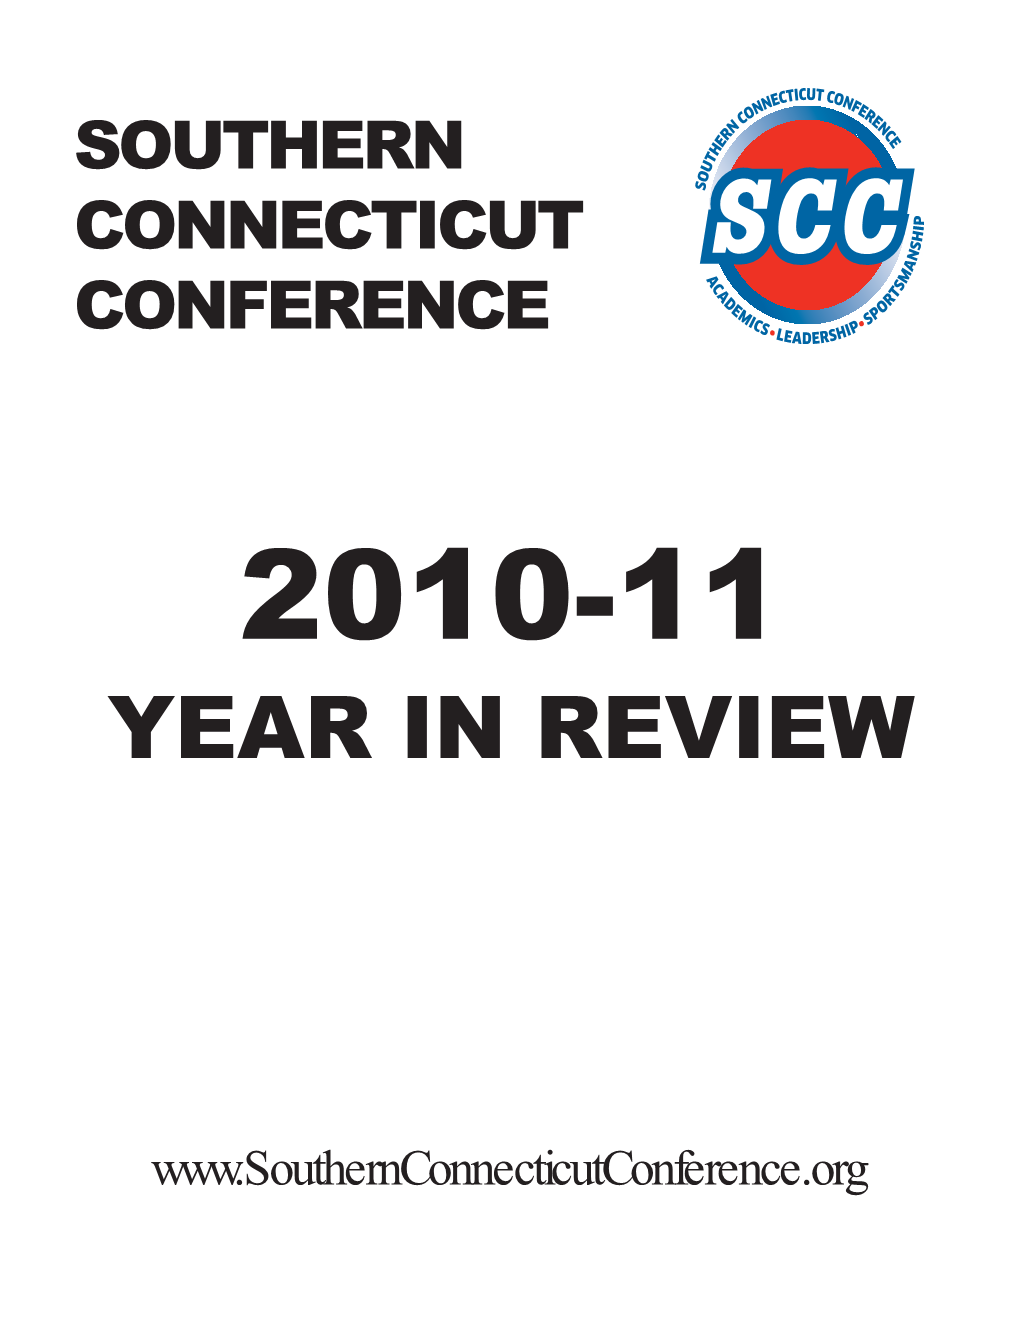 SCC 2010-11 Year in Review.Pmd